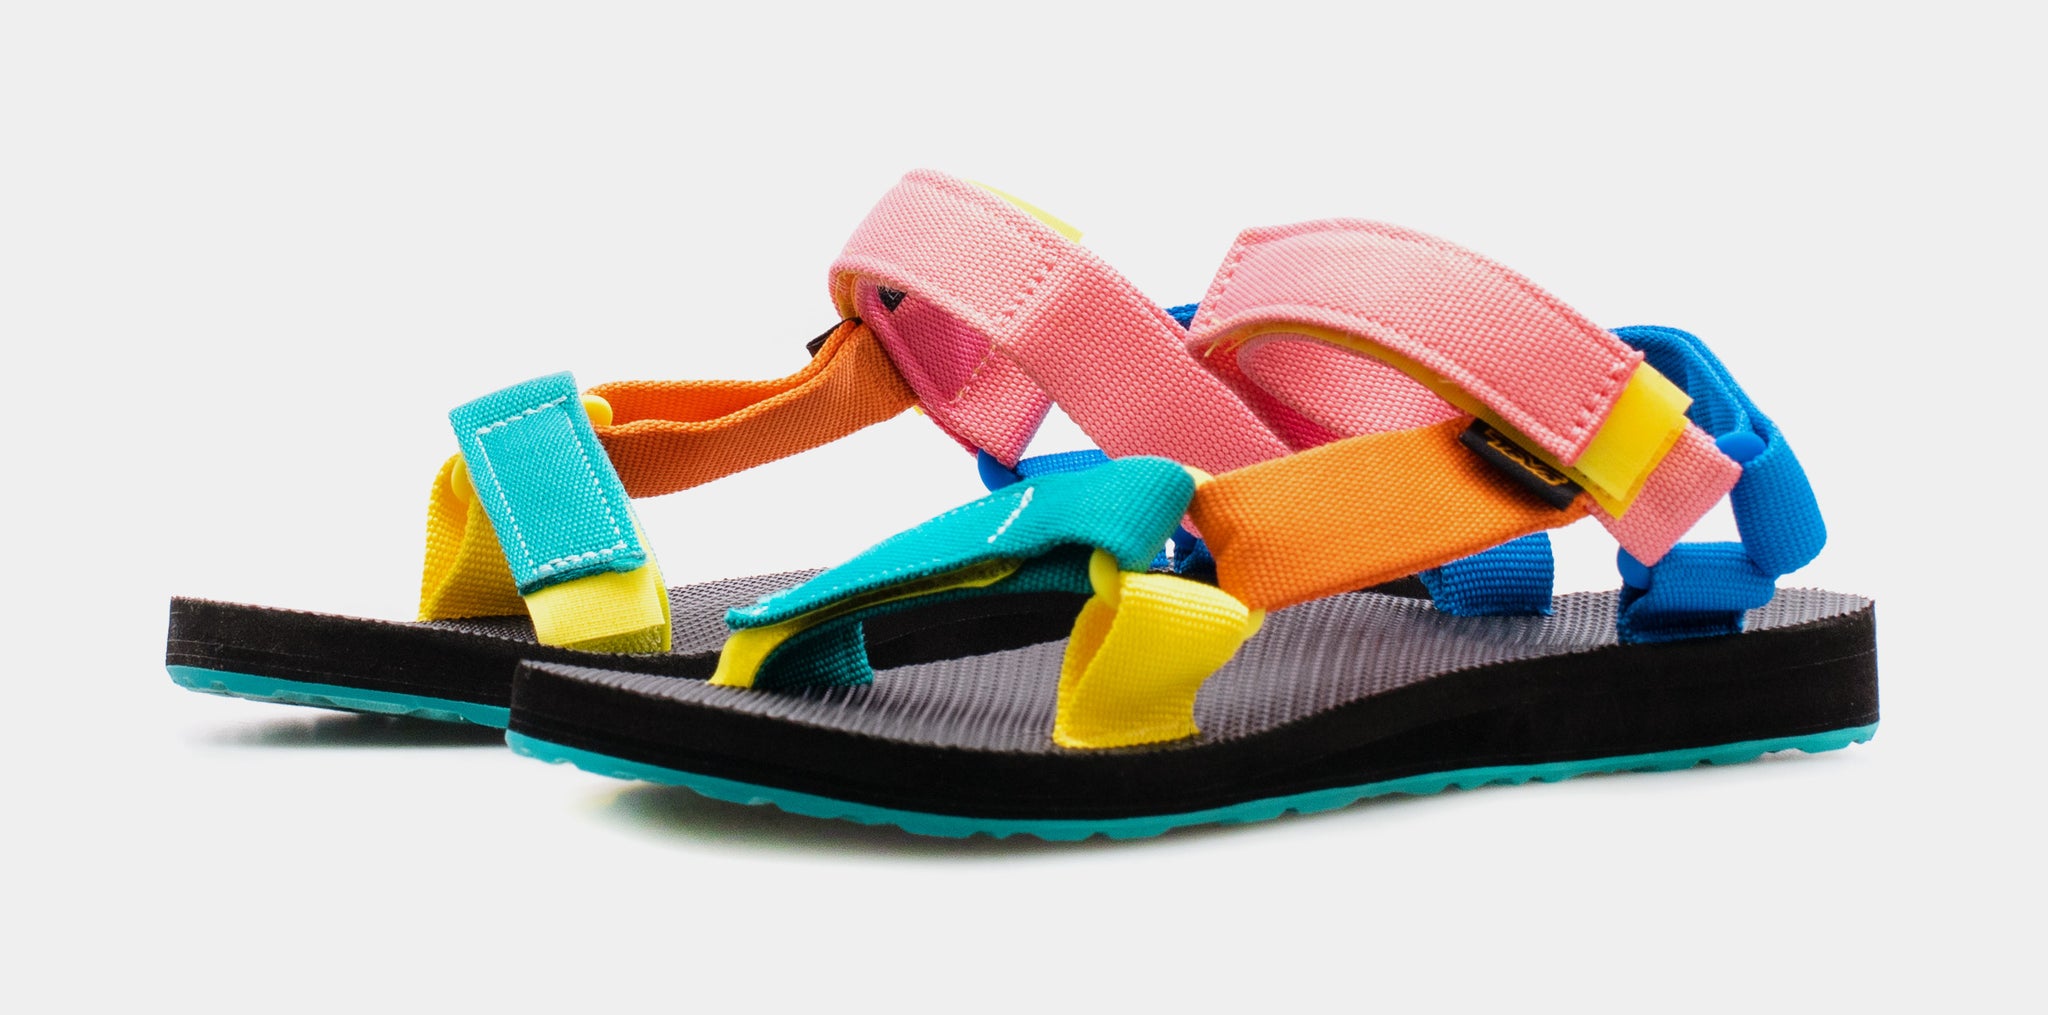 Teva Sandals Review 2023: We Love Their Comfort, Durability, and Support